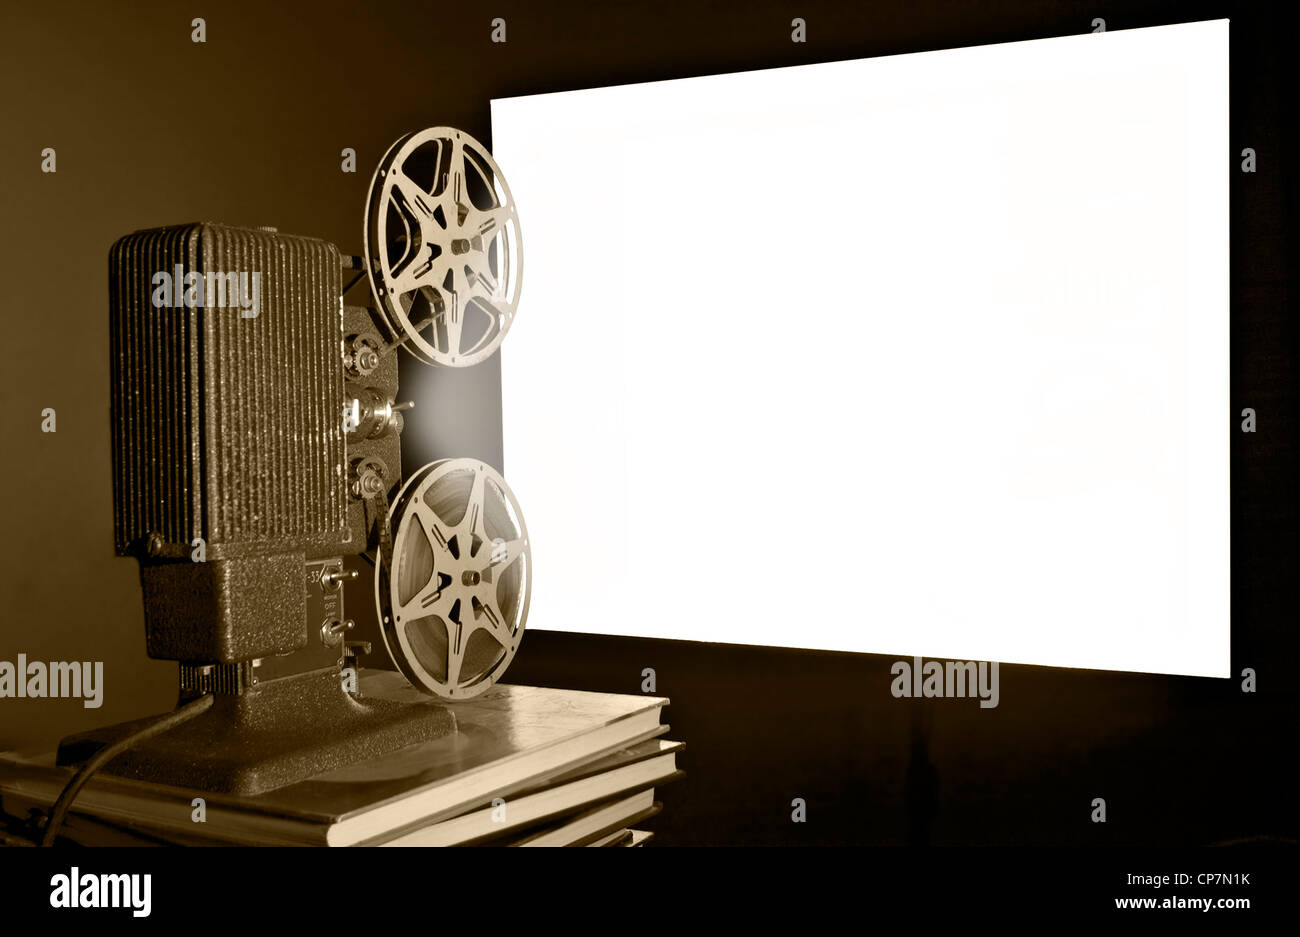 A vintage reel to reel film movie projector shot in a home setting